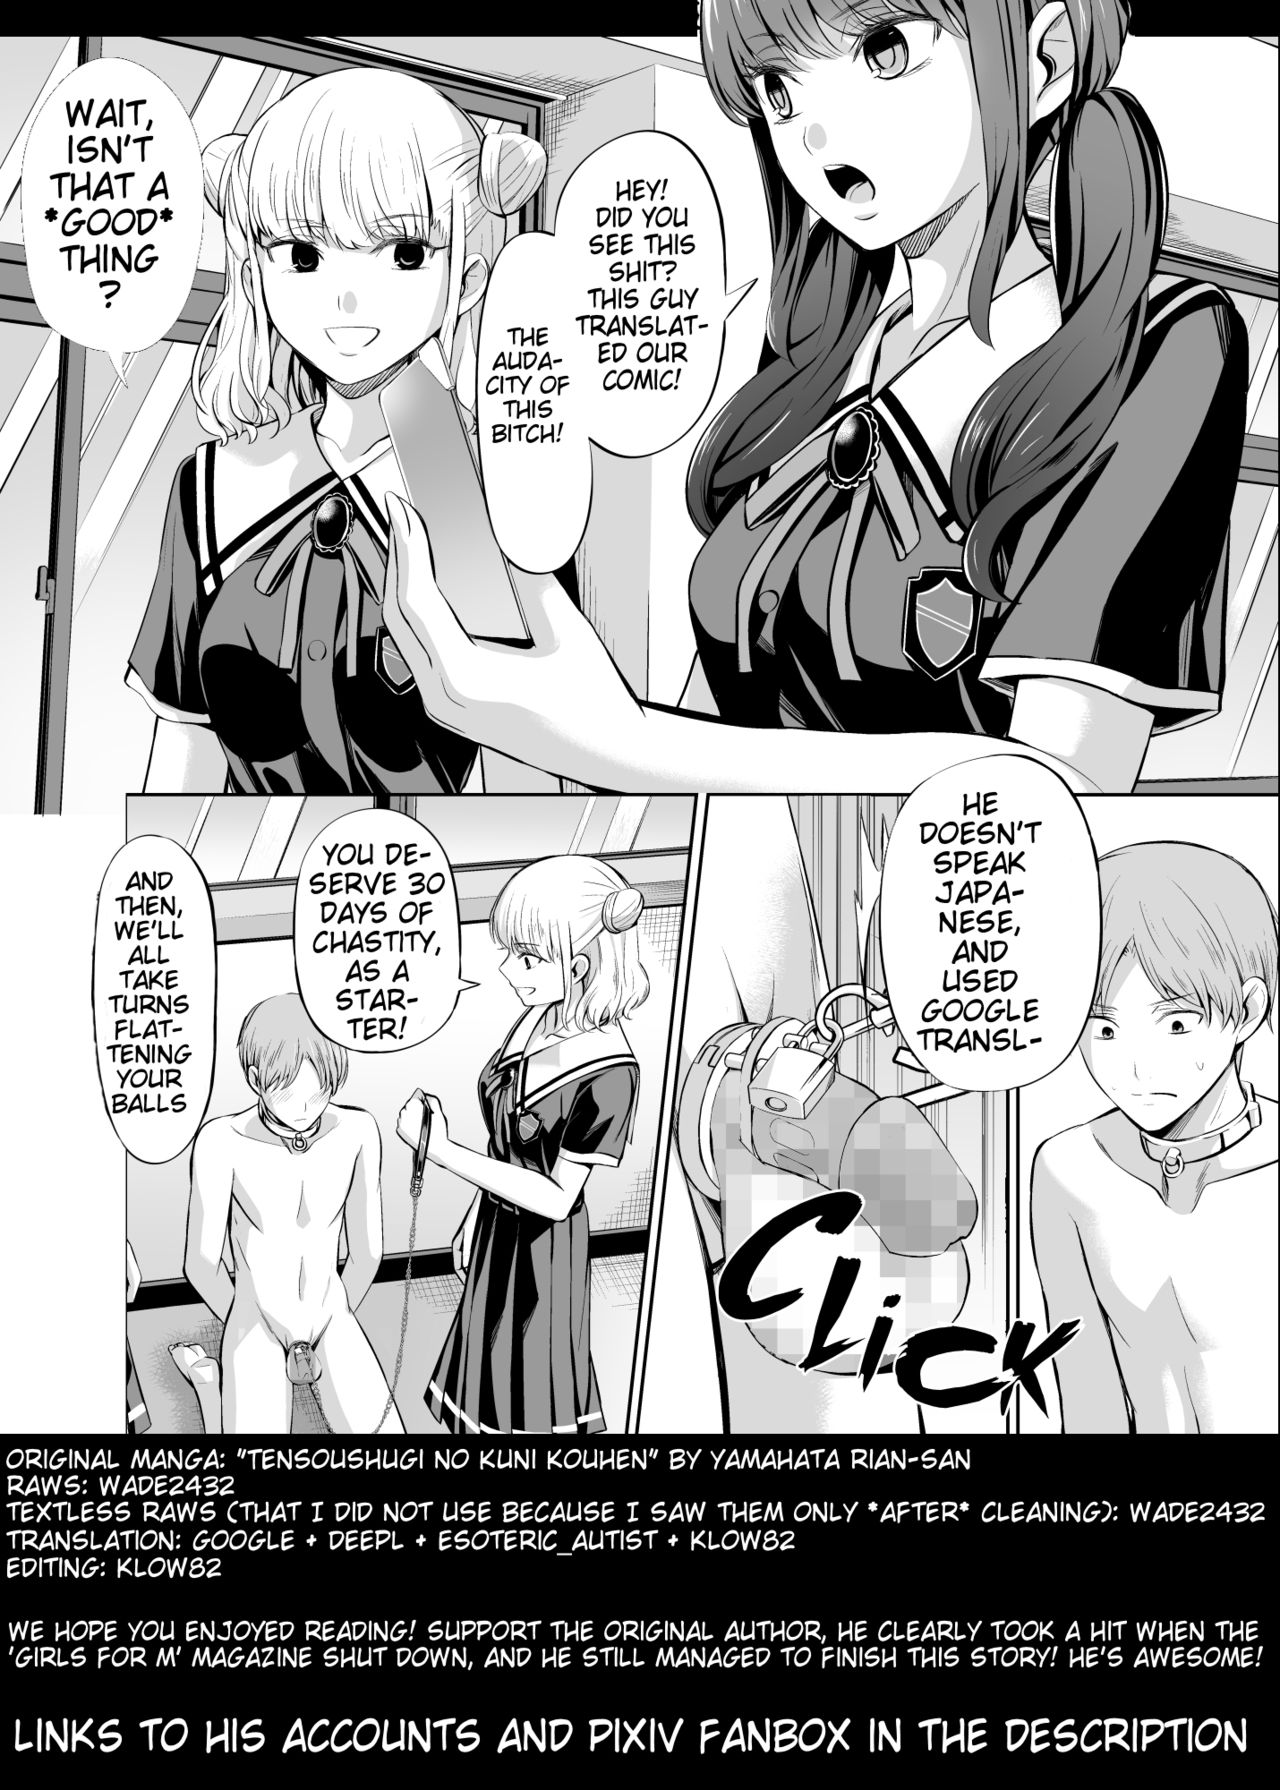 [Yamahata Rian] Tensuushugi no Kuni Kouhen | A Country Based on Point System Sequel [English] [Esoteric_Autist, klow82] page 43 full